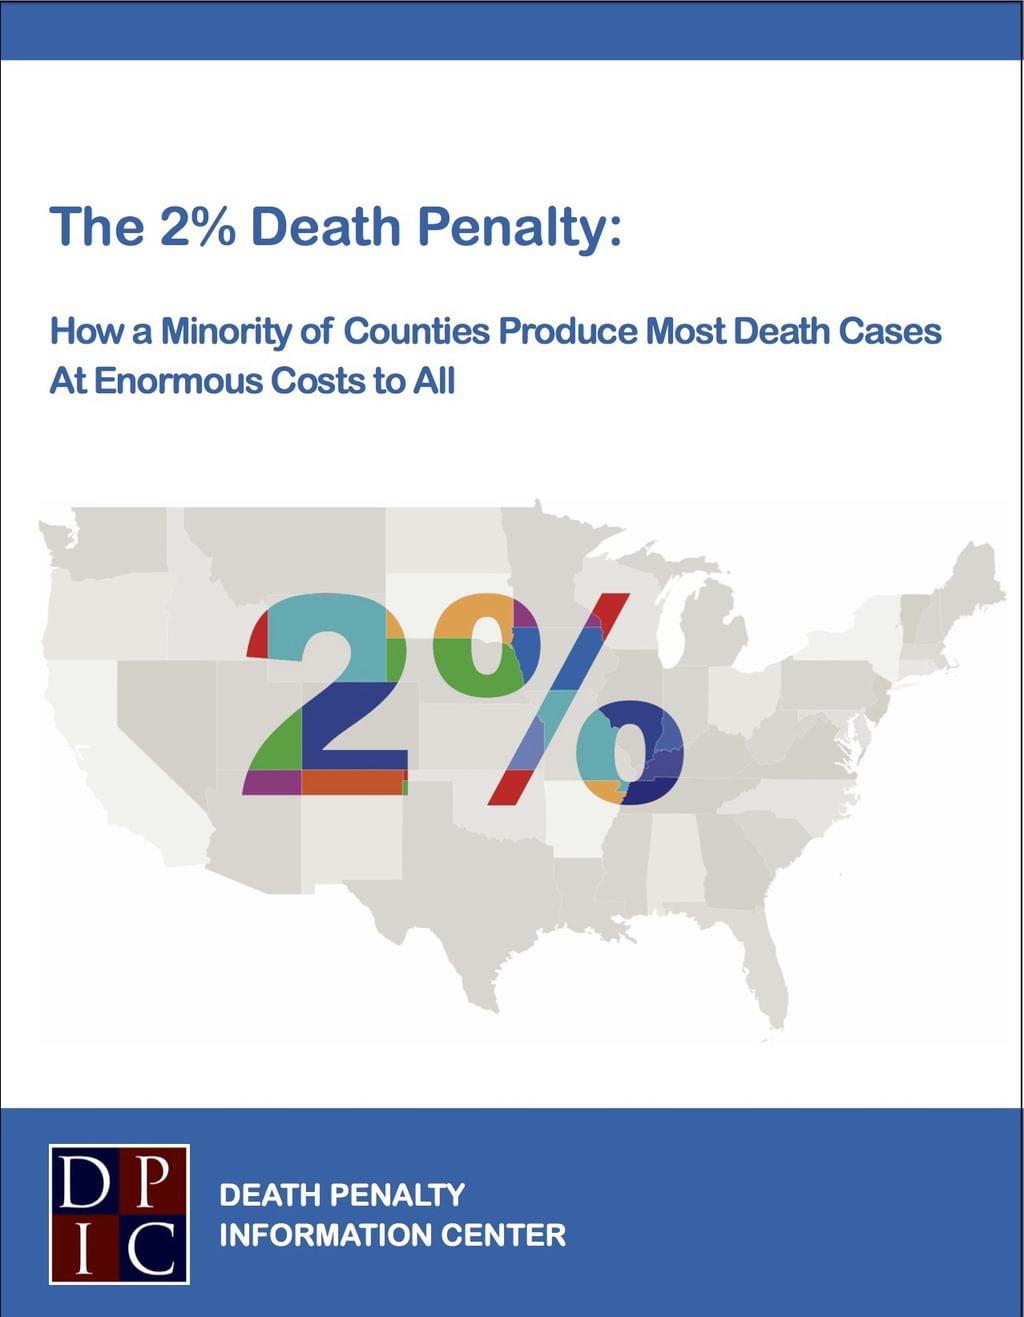 NEW DPIC REPORT: Only 2% of Counties Responsible for Majority of U.S. Death Penalty